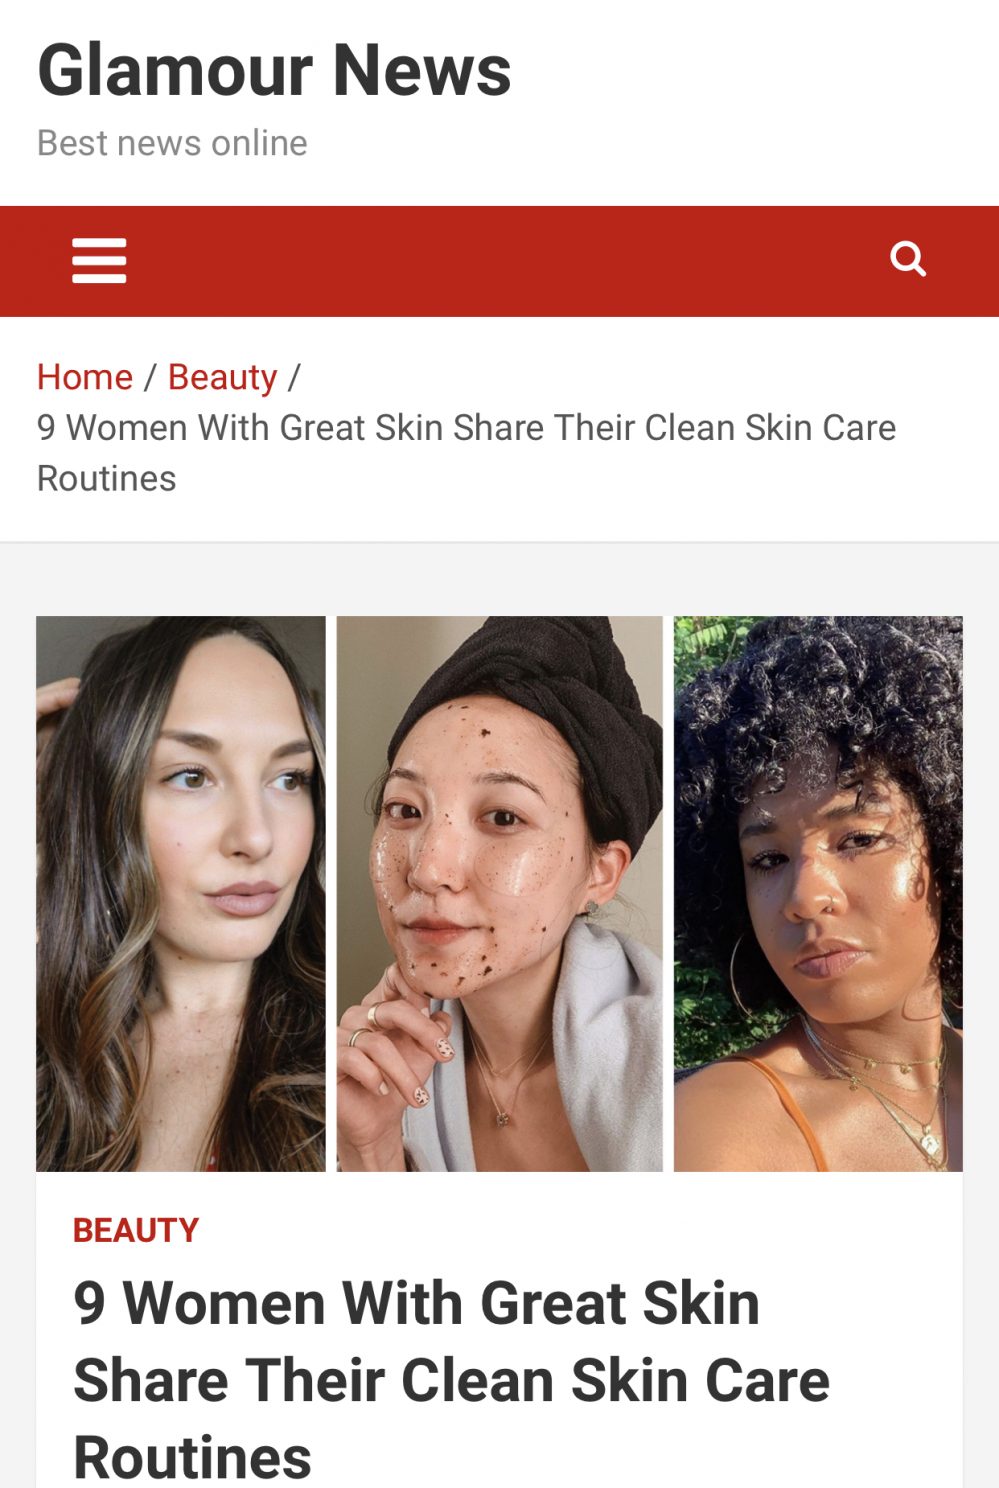 9 Women With Great Skin Share Their Clean Skin-Care Routines